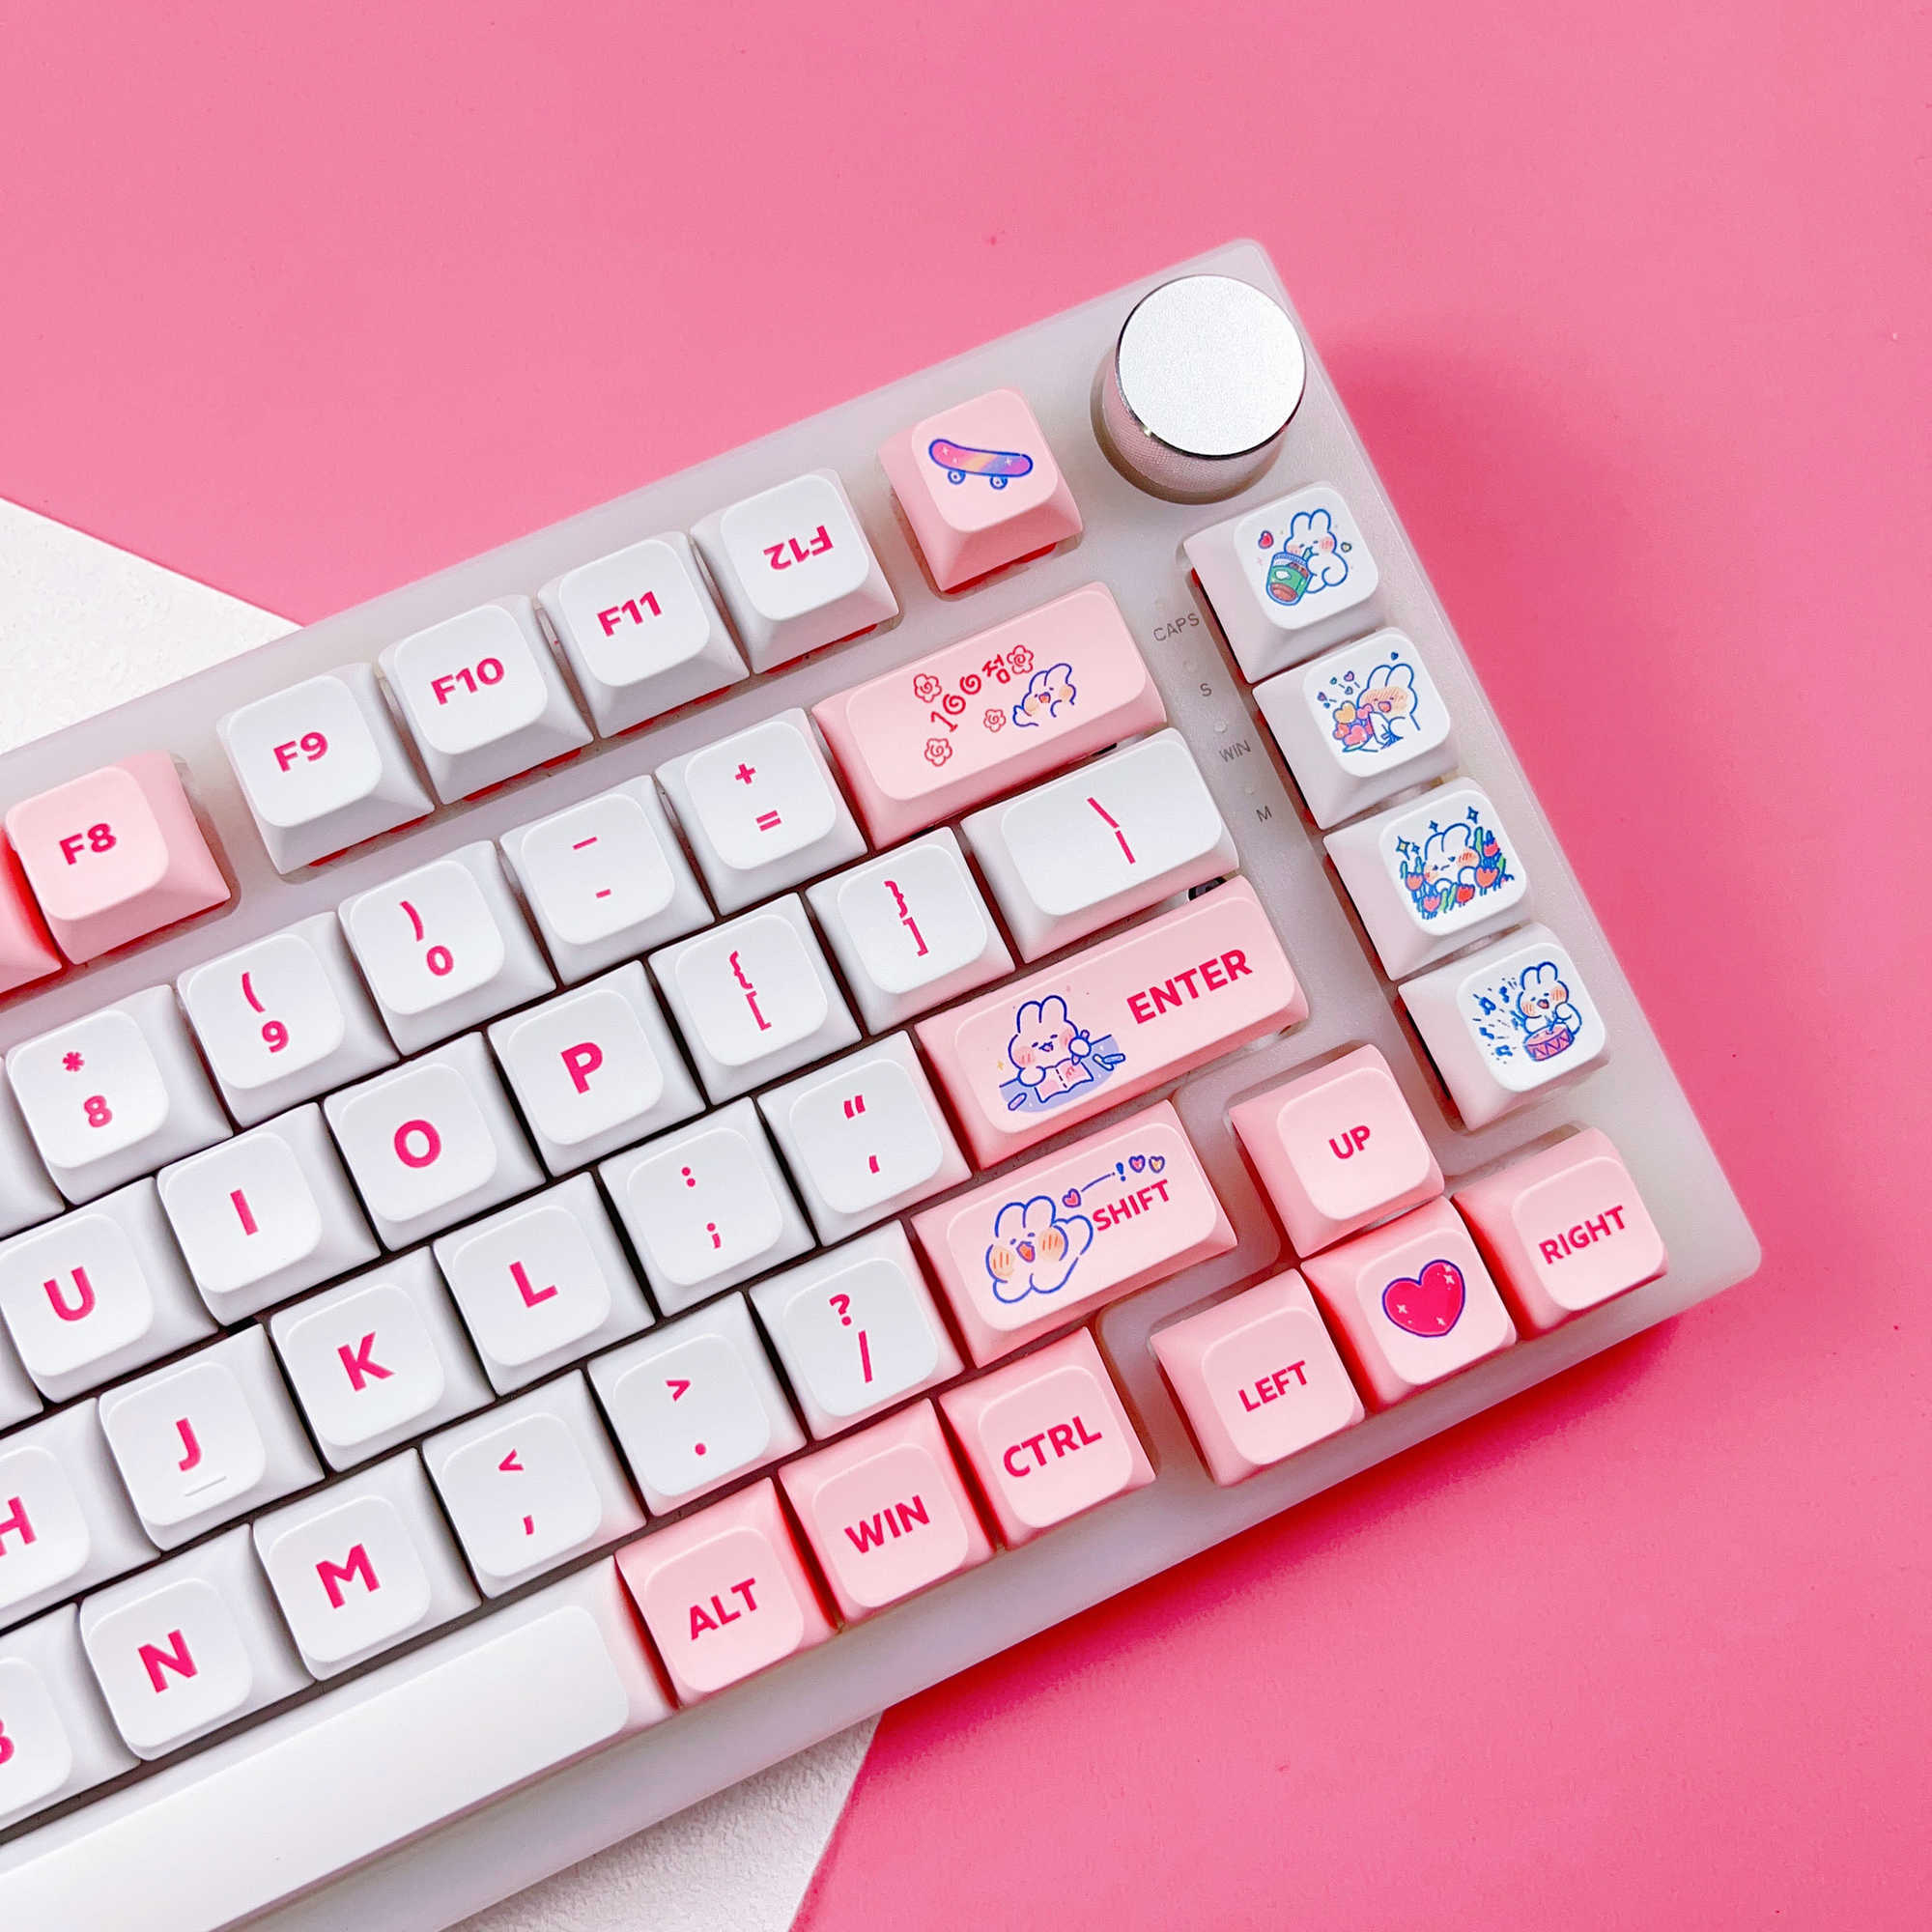 Keyboards 129 Keys XDA Profile PBT Pink Bunny Theme Cute Creative Keycap DYE-SUB Suitable For MX Switch Personality Mechanical Keyboard T230215